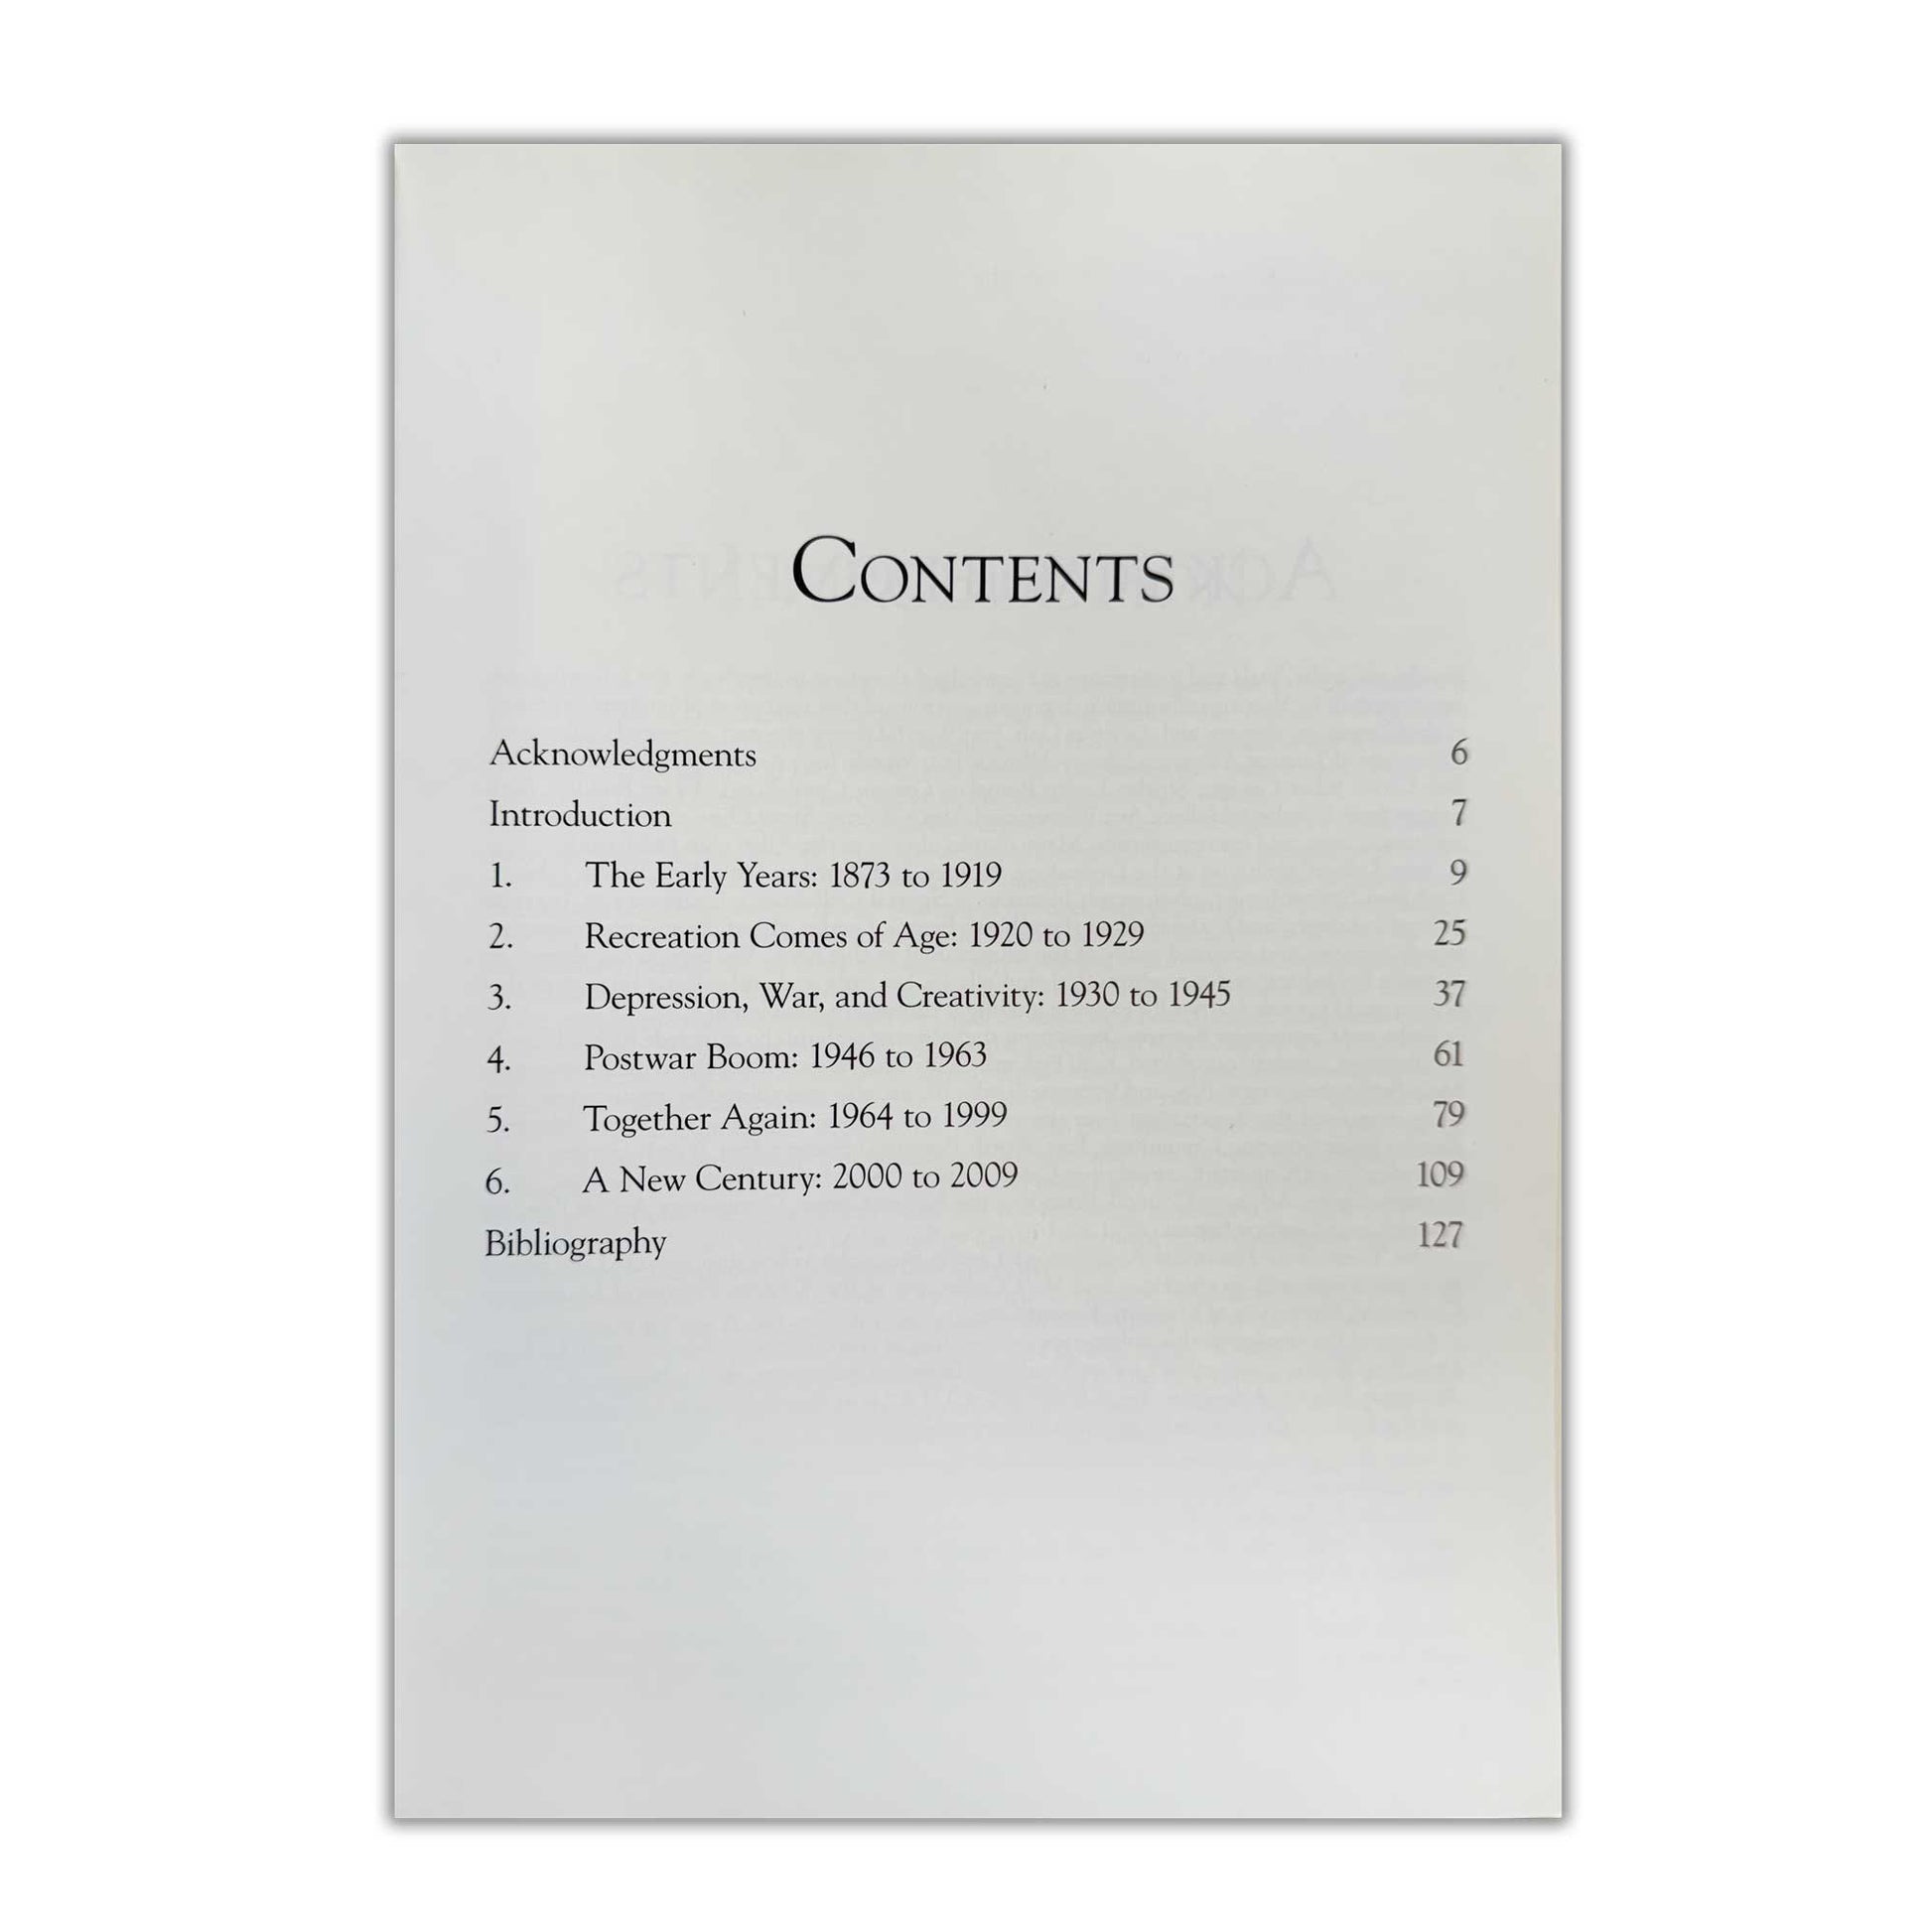 Fort Worth Parks book table of contents